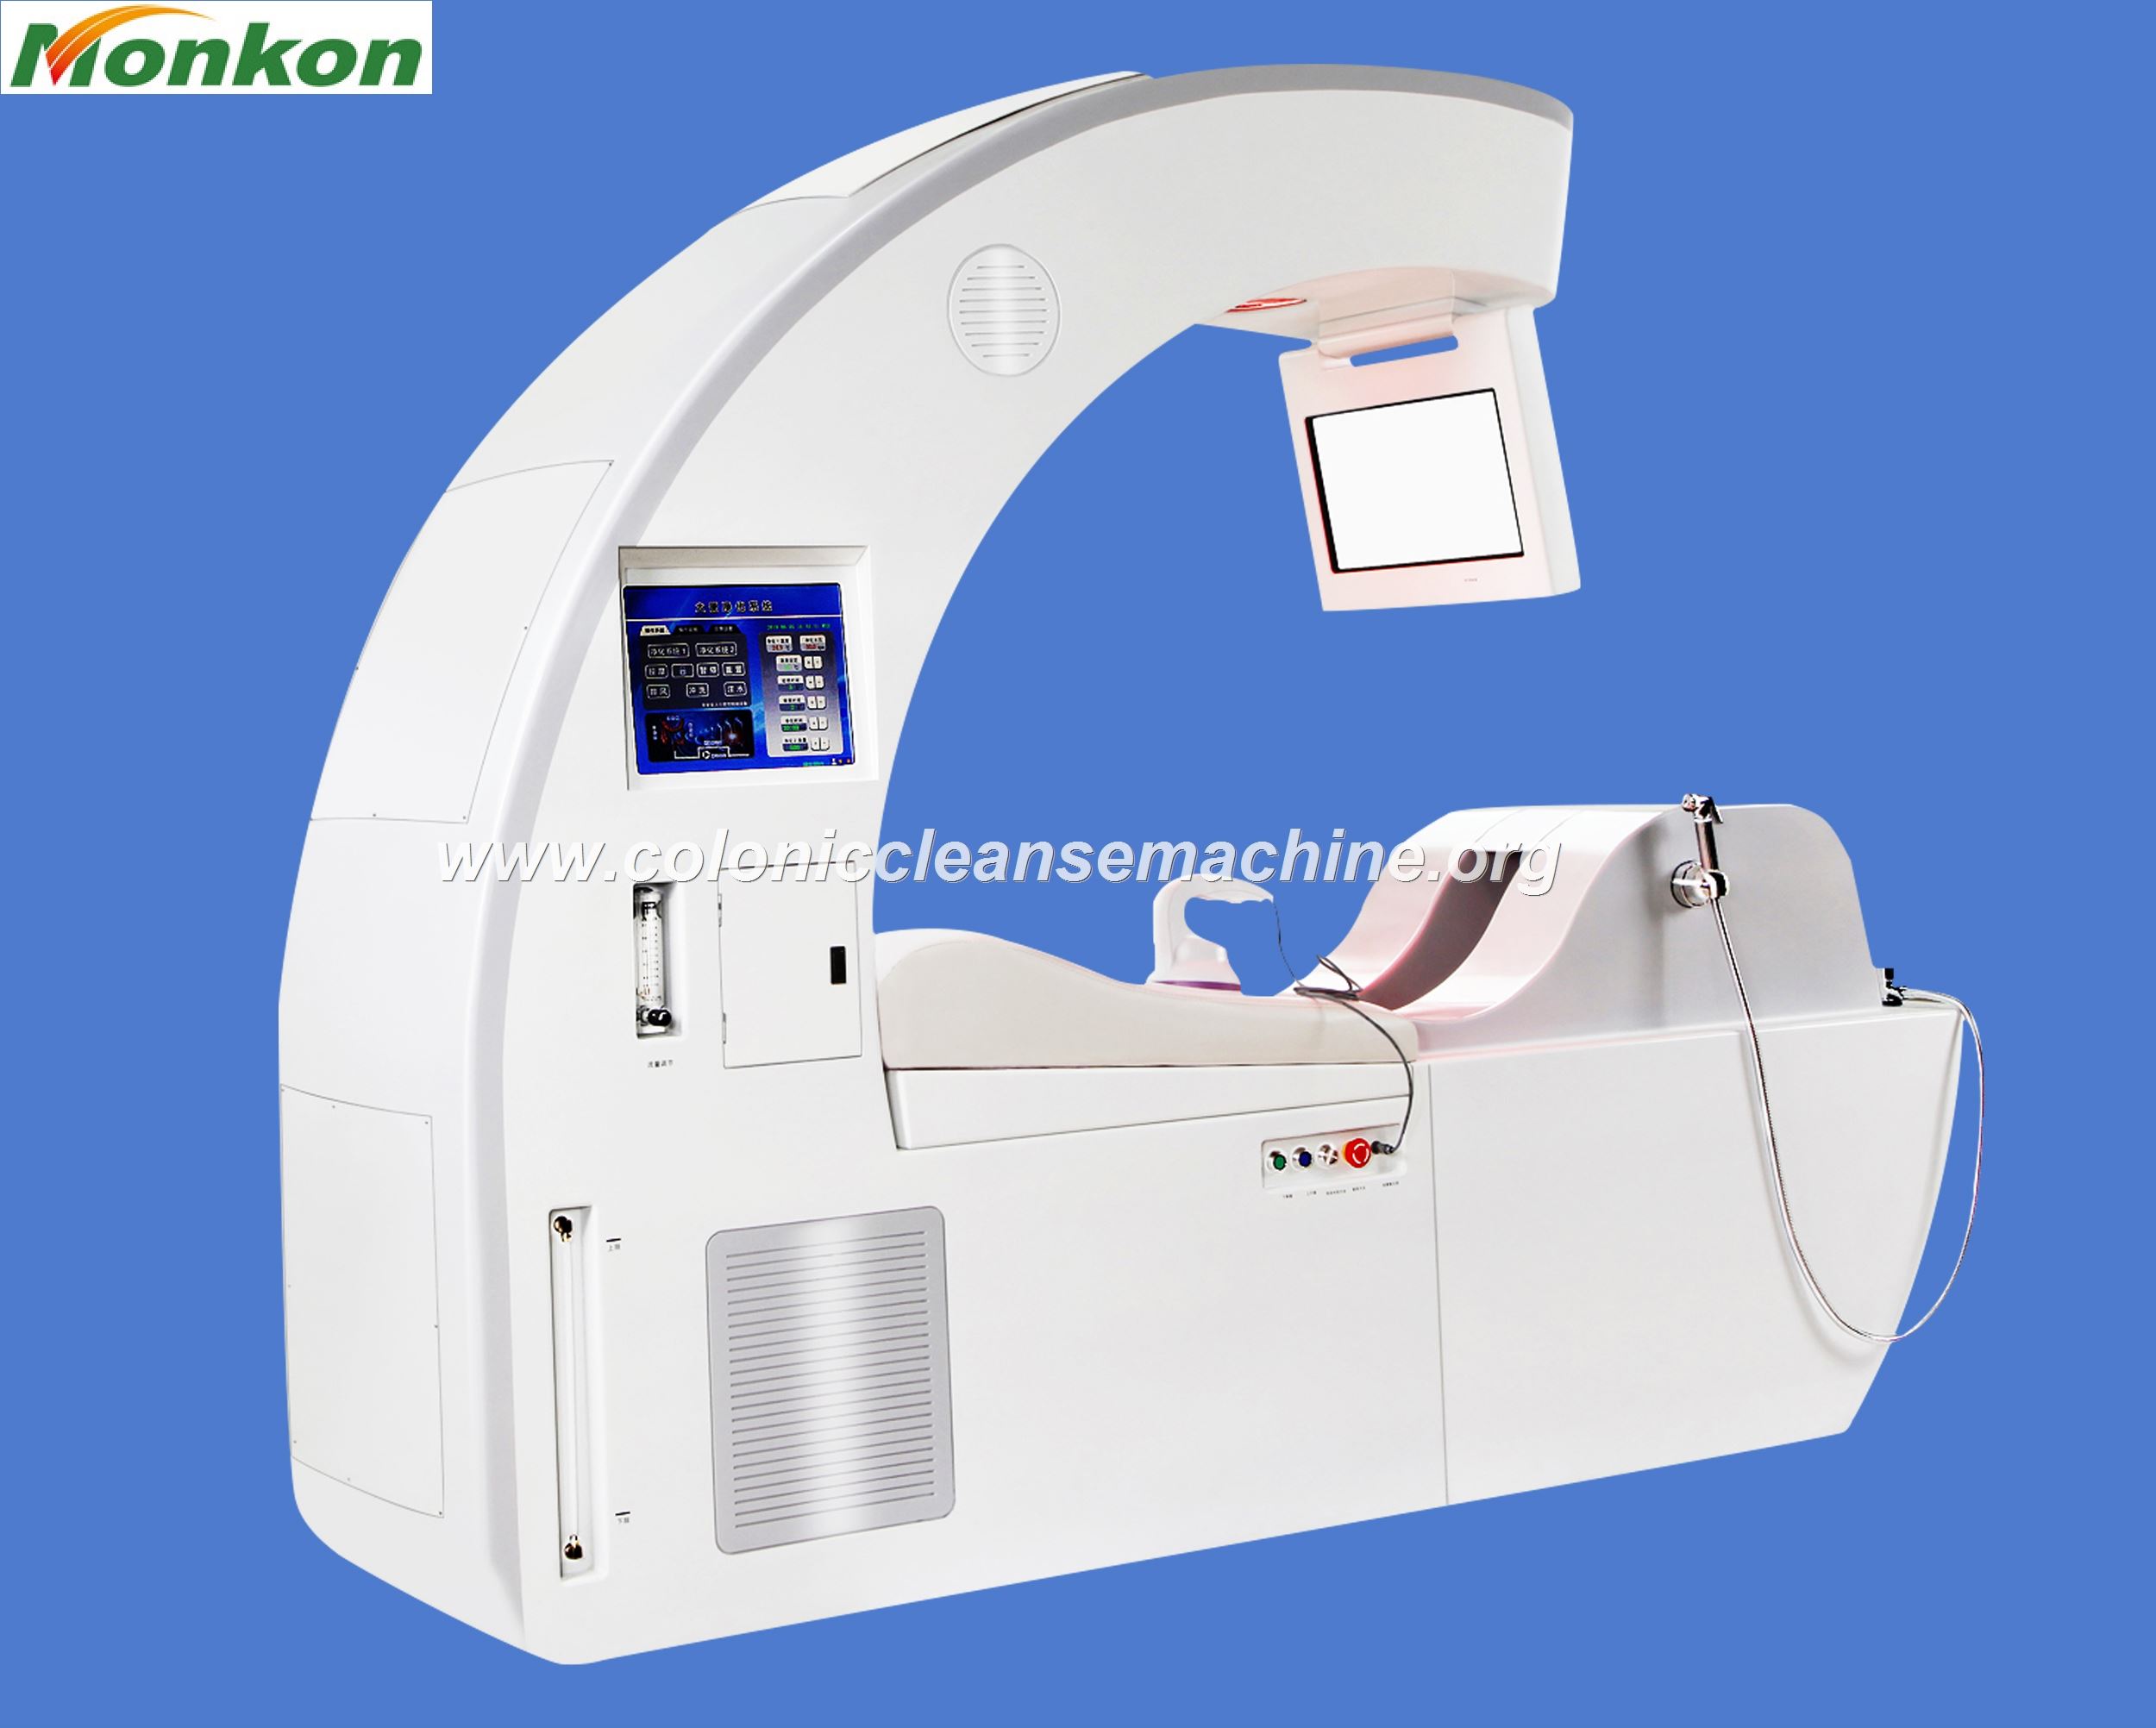 MAIKONG colon hydrotherapy machine india